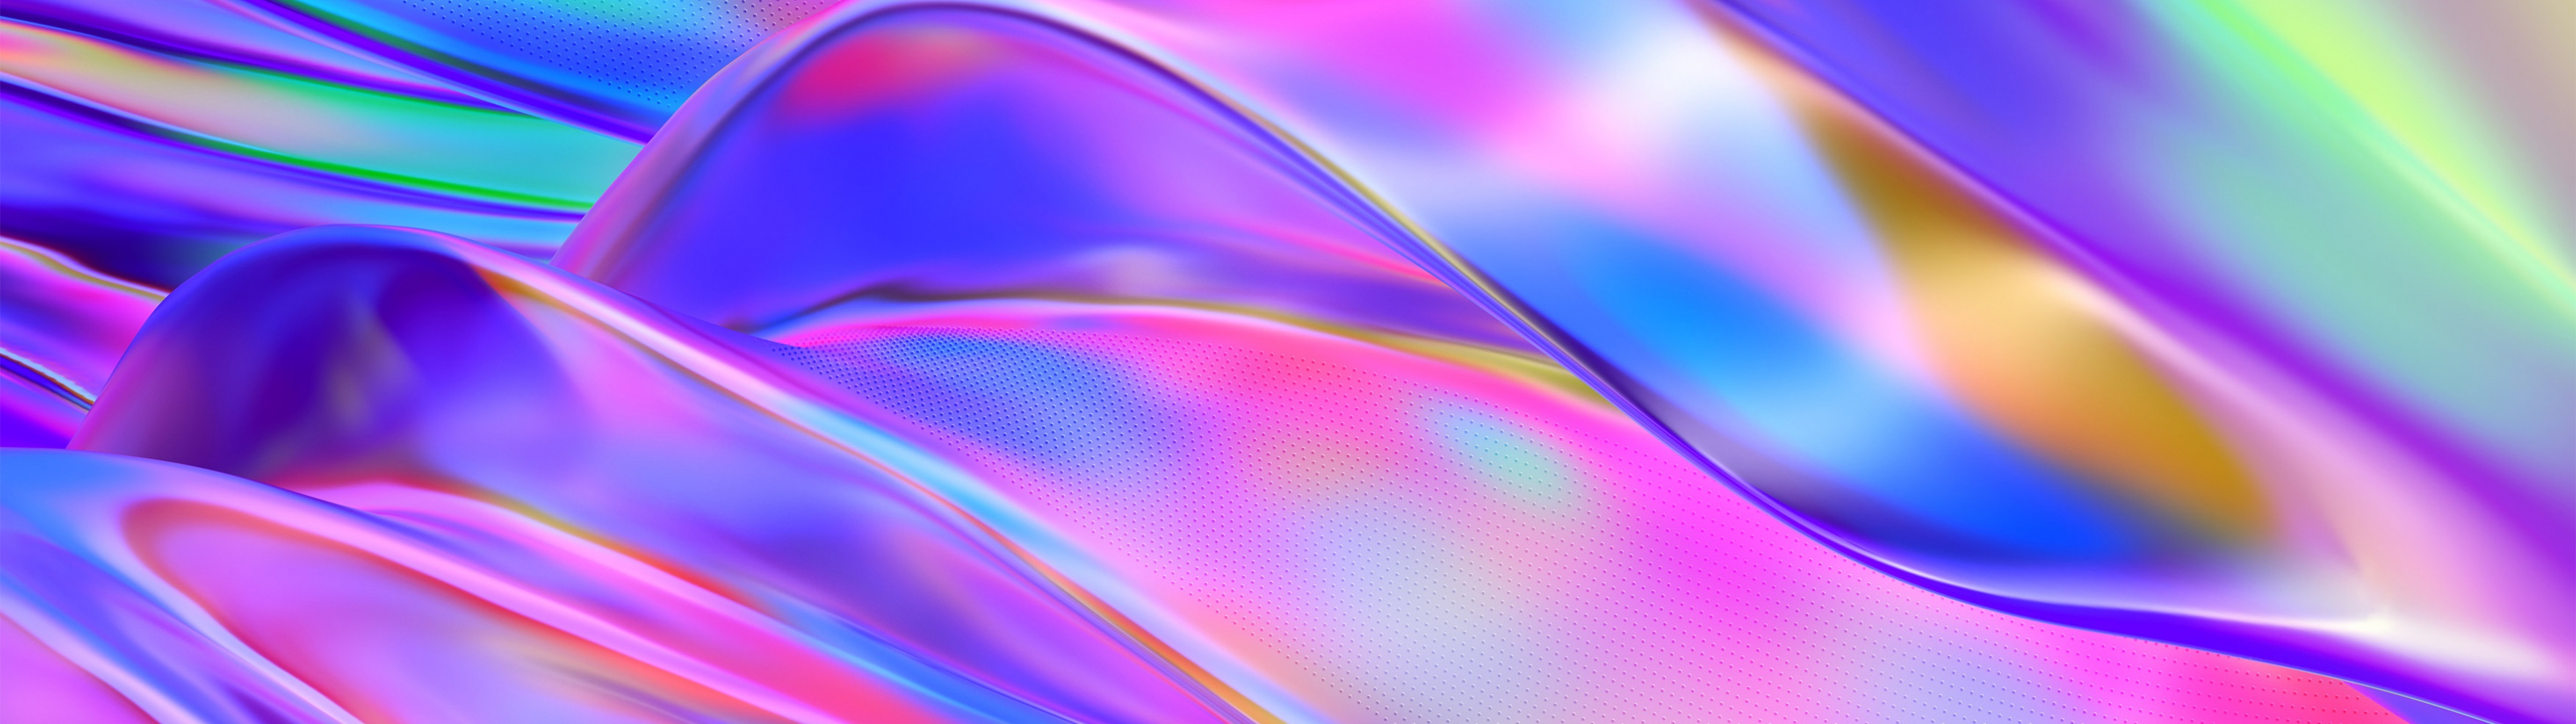 Waves Wallpaper 4K, Chromatic, Colorful, Abstract, #3575